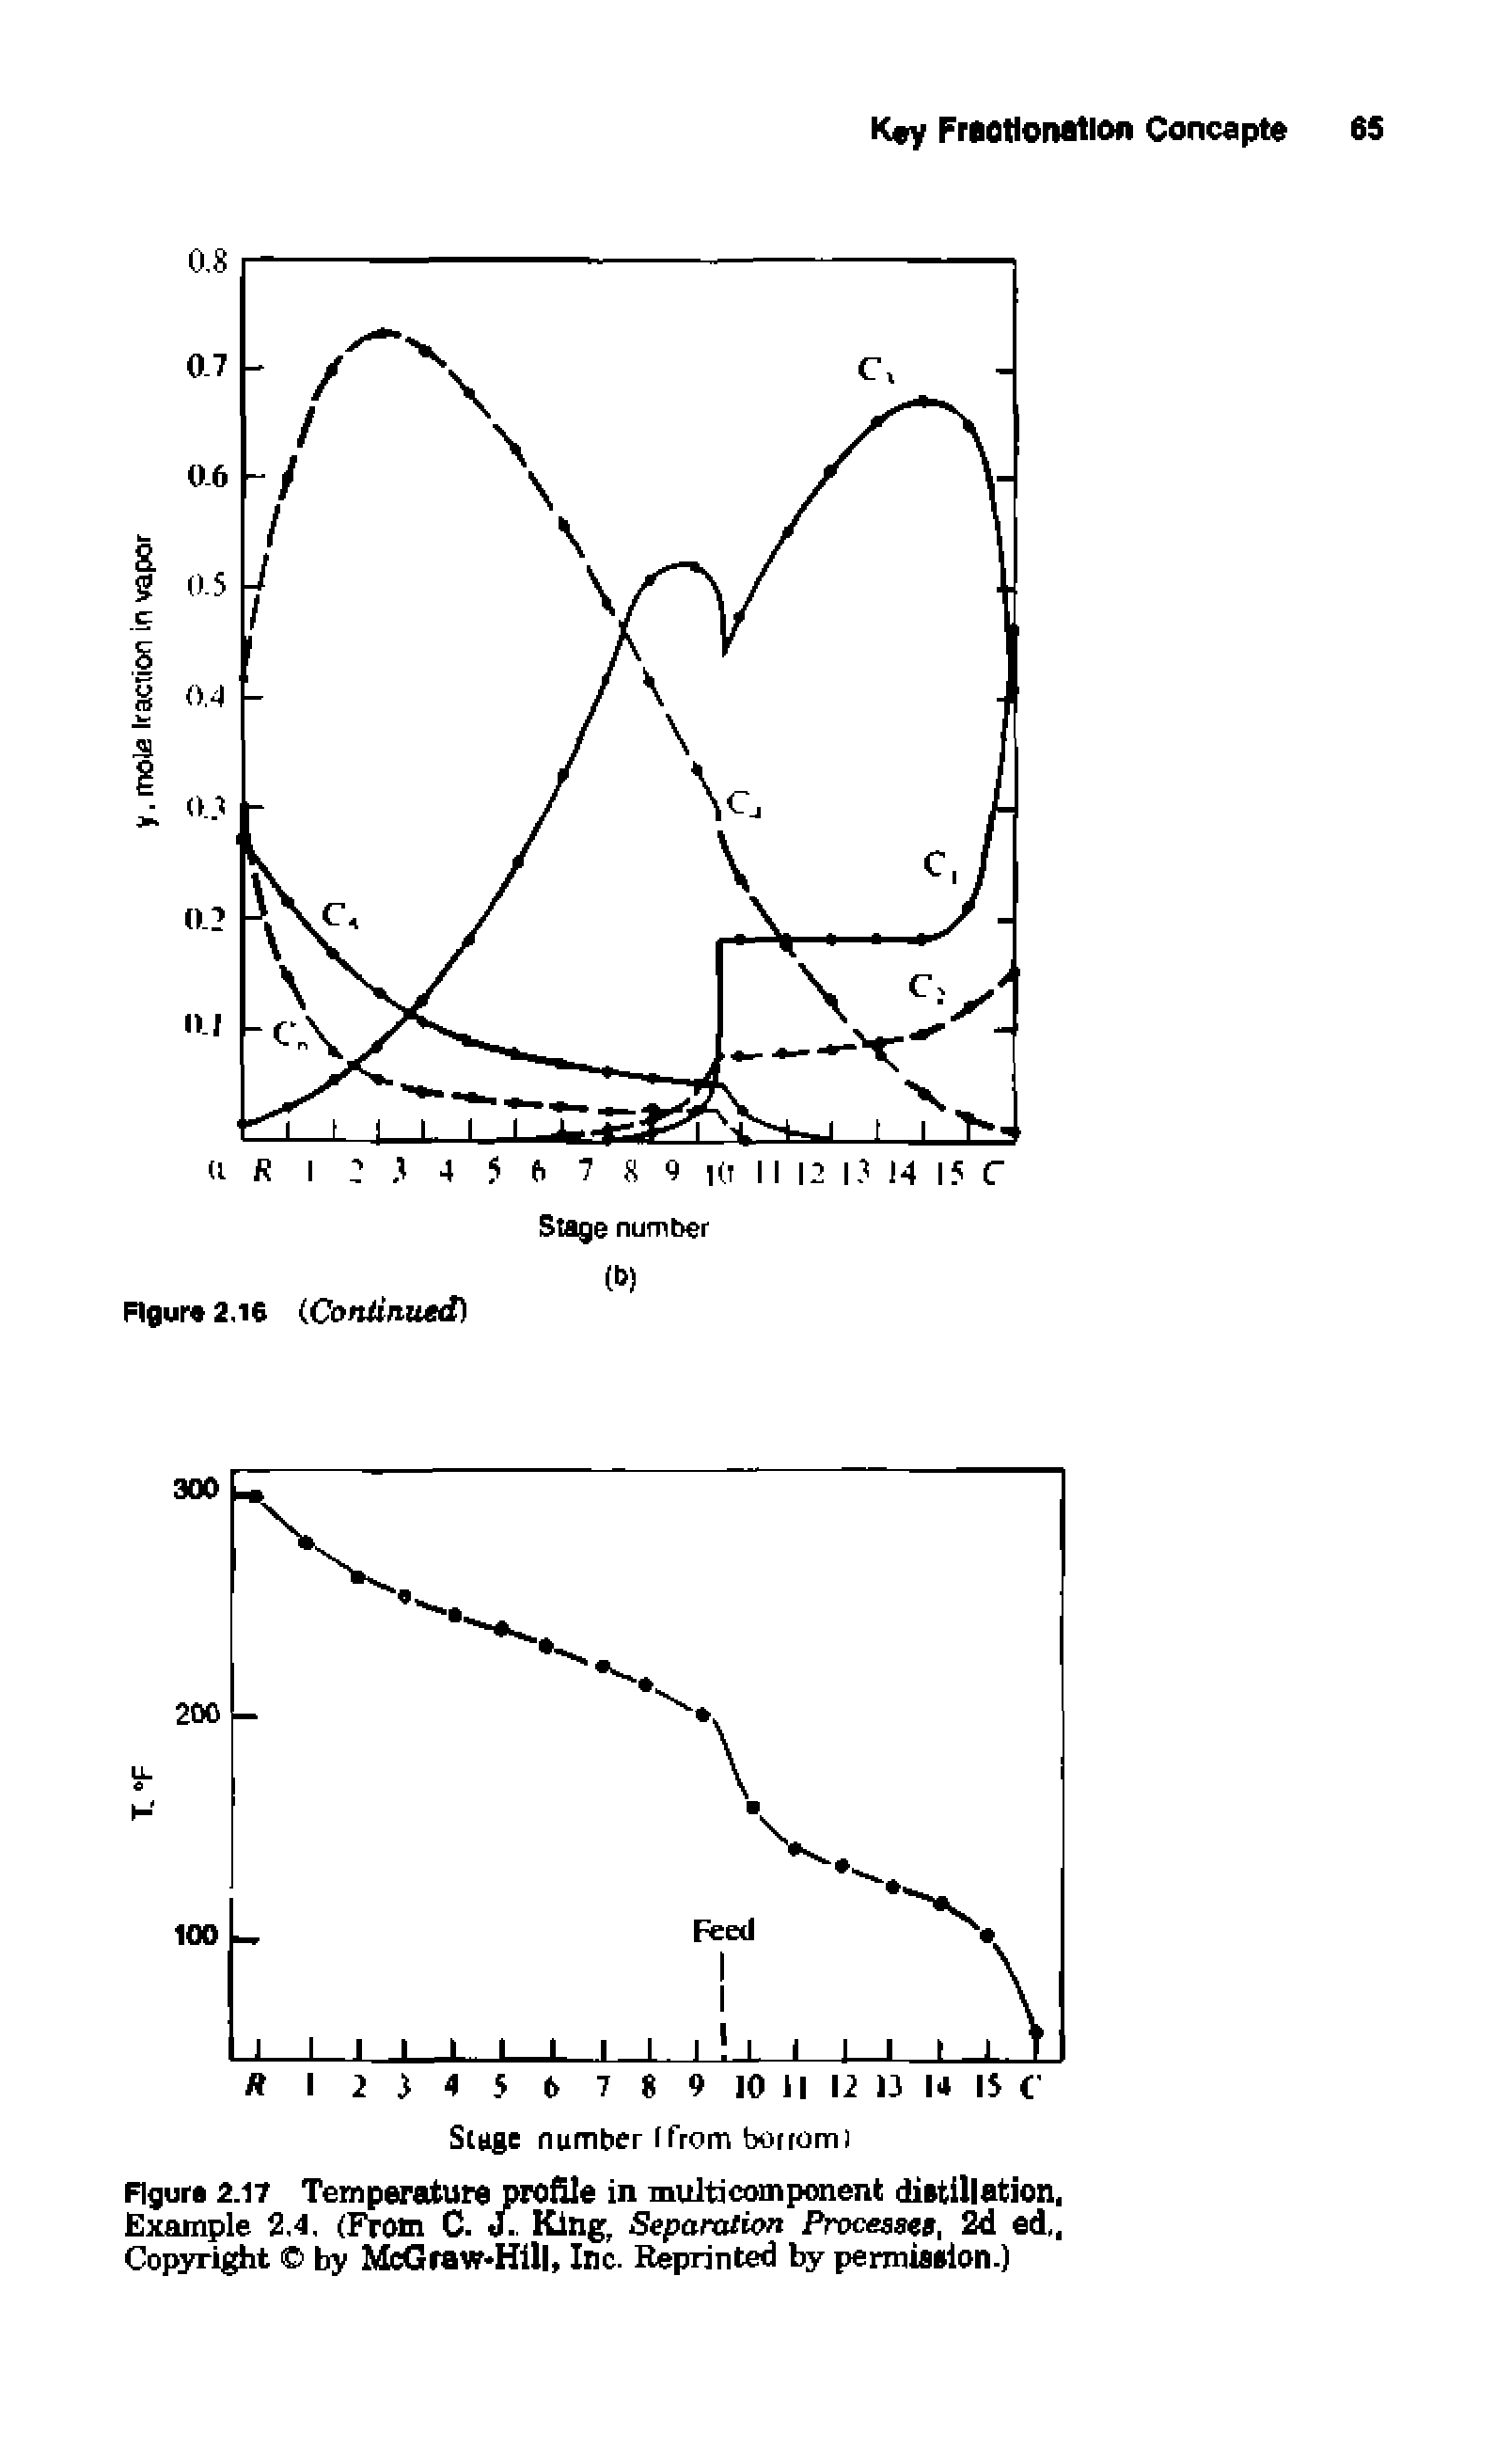 Figure 2.17 Temperature profile in multicomponent distillation, Example 2,4. (From C. d.. King, Separation Processes, 2d ed, Copyright by McGraw-Hill, Inc. Reprinted by permission.)...